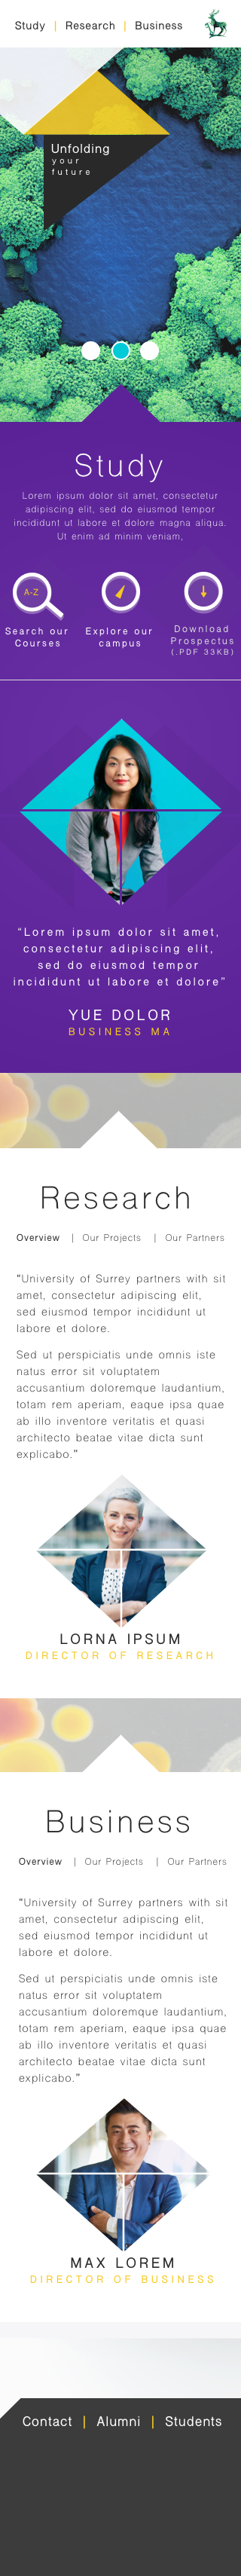 University of Surrey - Origami Concept for mobile